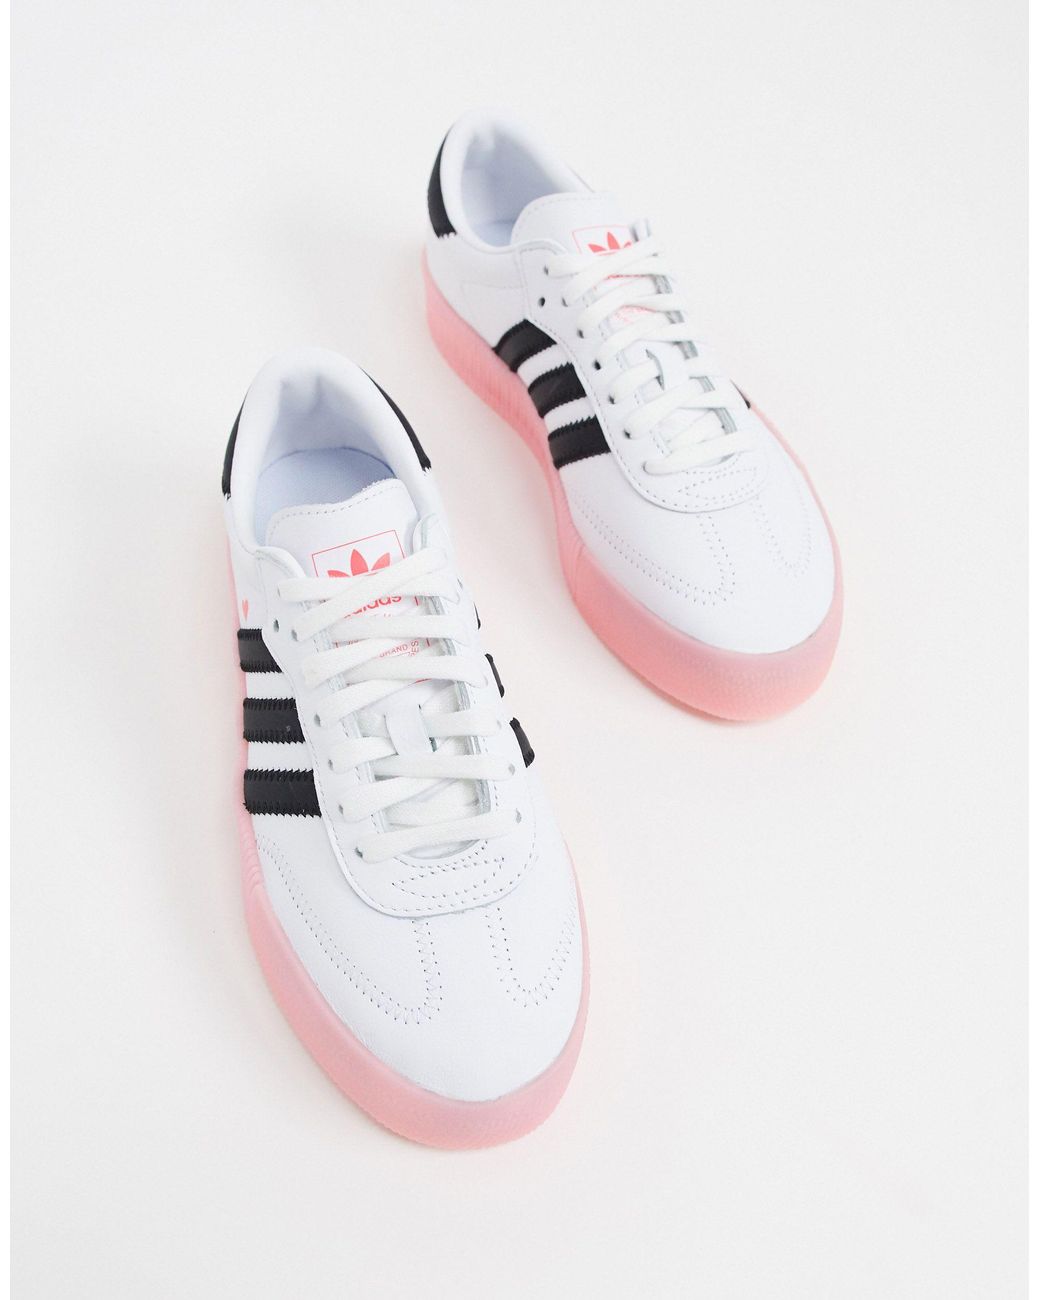 adidas Samba Rose Sneakers In Pink With Gum Sole | Sneakers, Womens sneakers,  White sneakers women